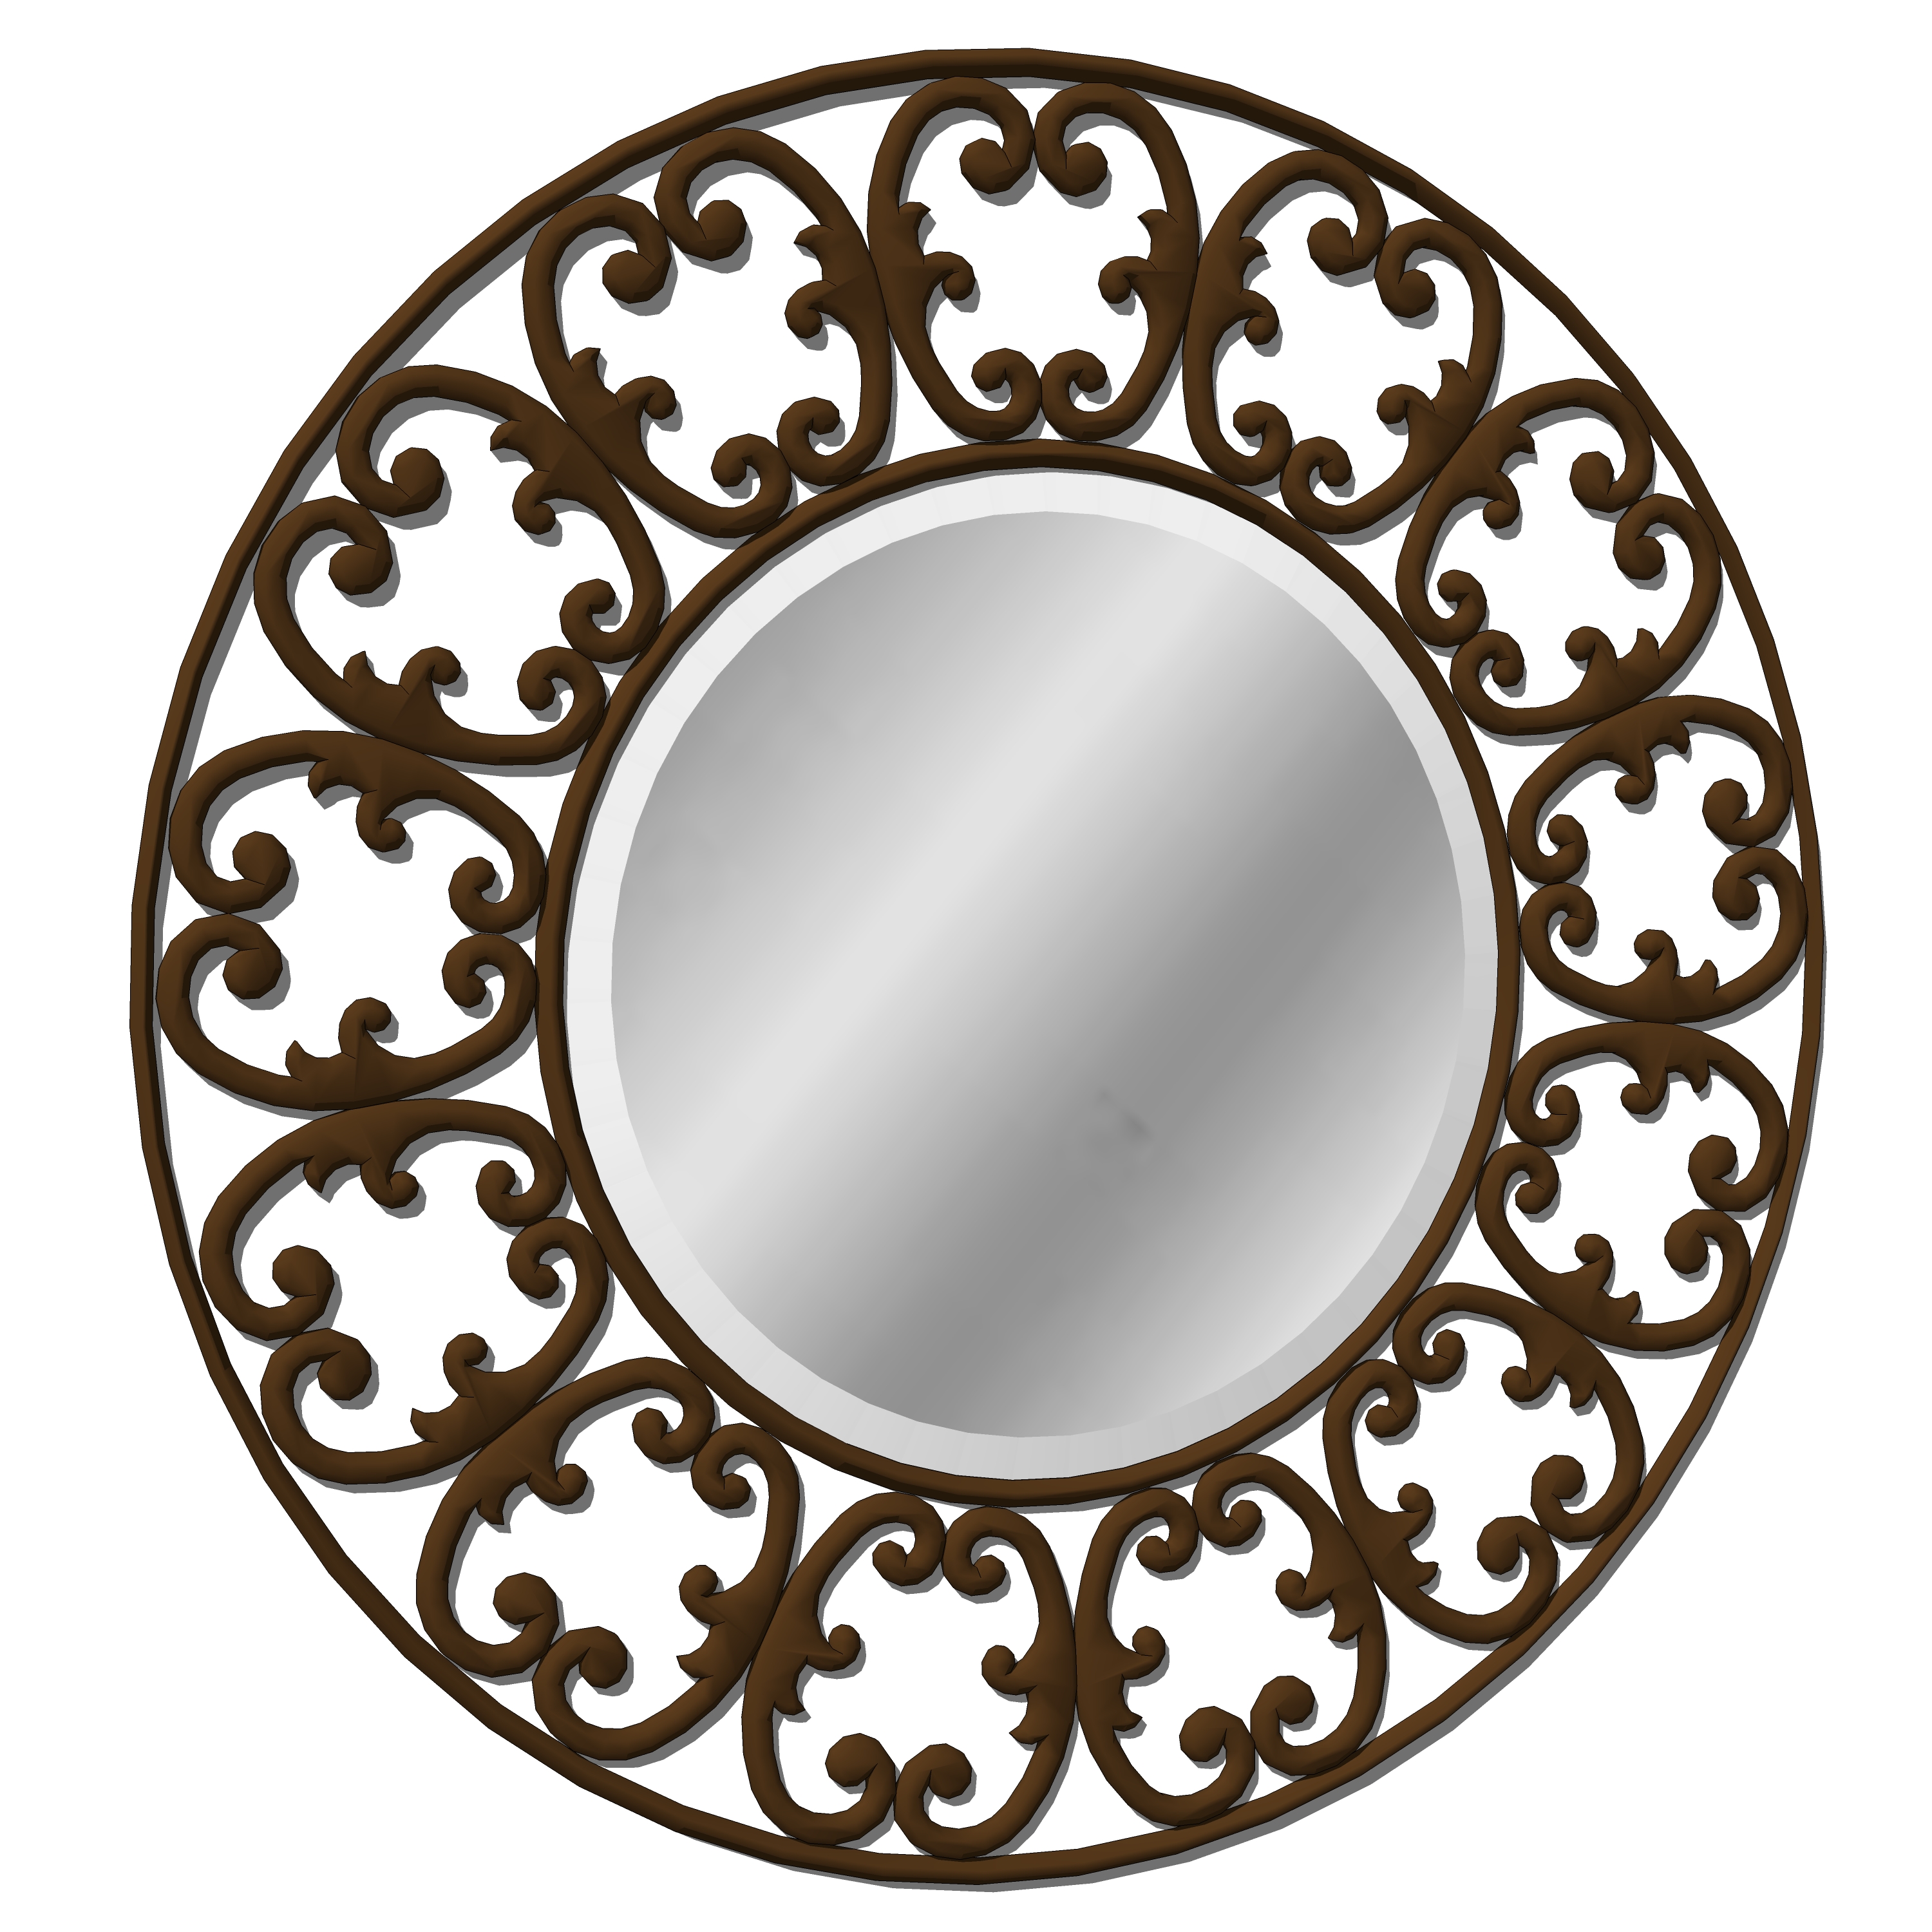 Round scrolled iron mirror with wrought iron side .... 